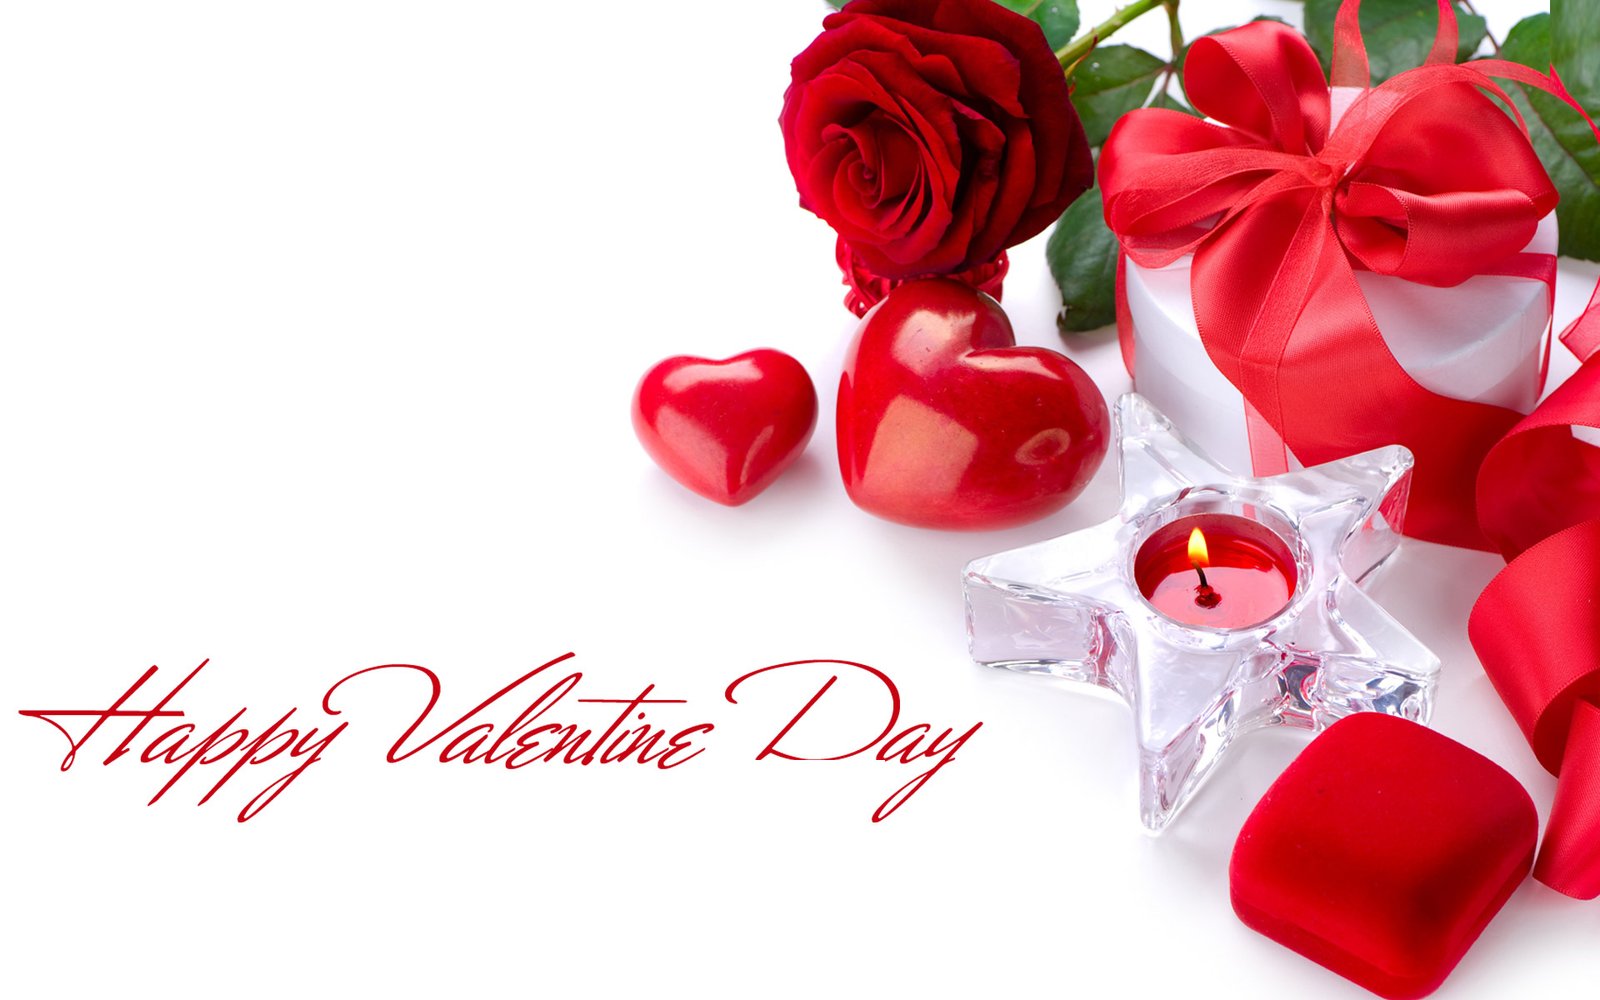 Happy Valentine's Day Wishes, Messages and Greetings